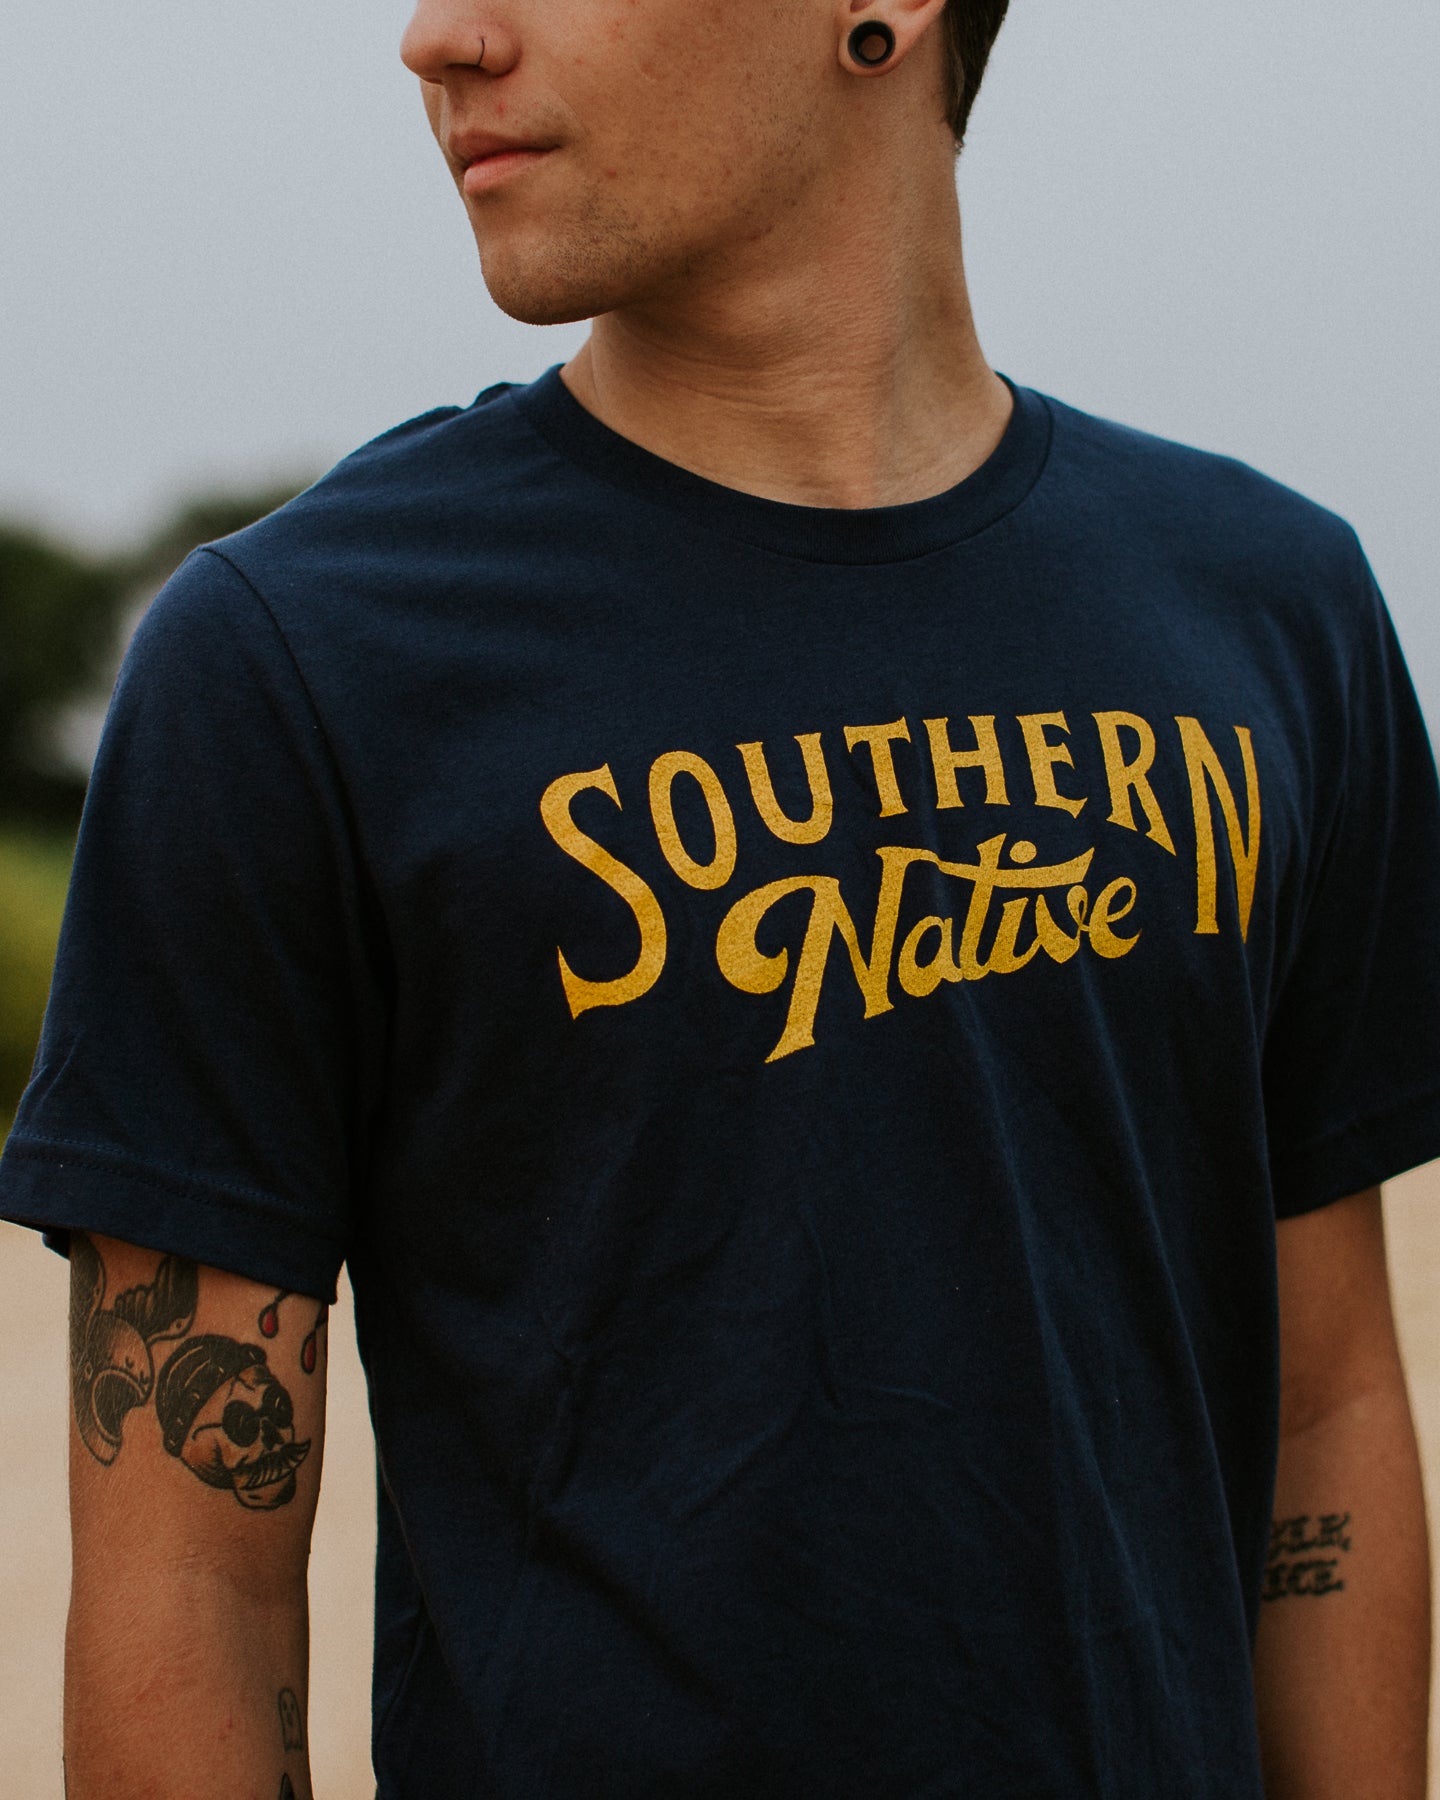 Southern Native Classic Typeface Shirt